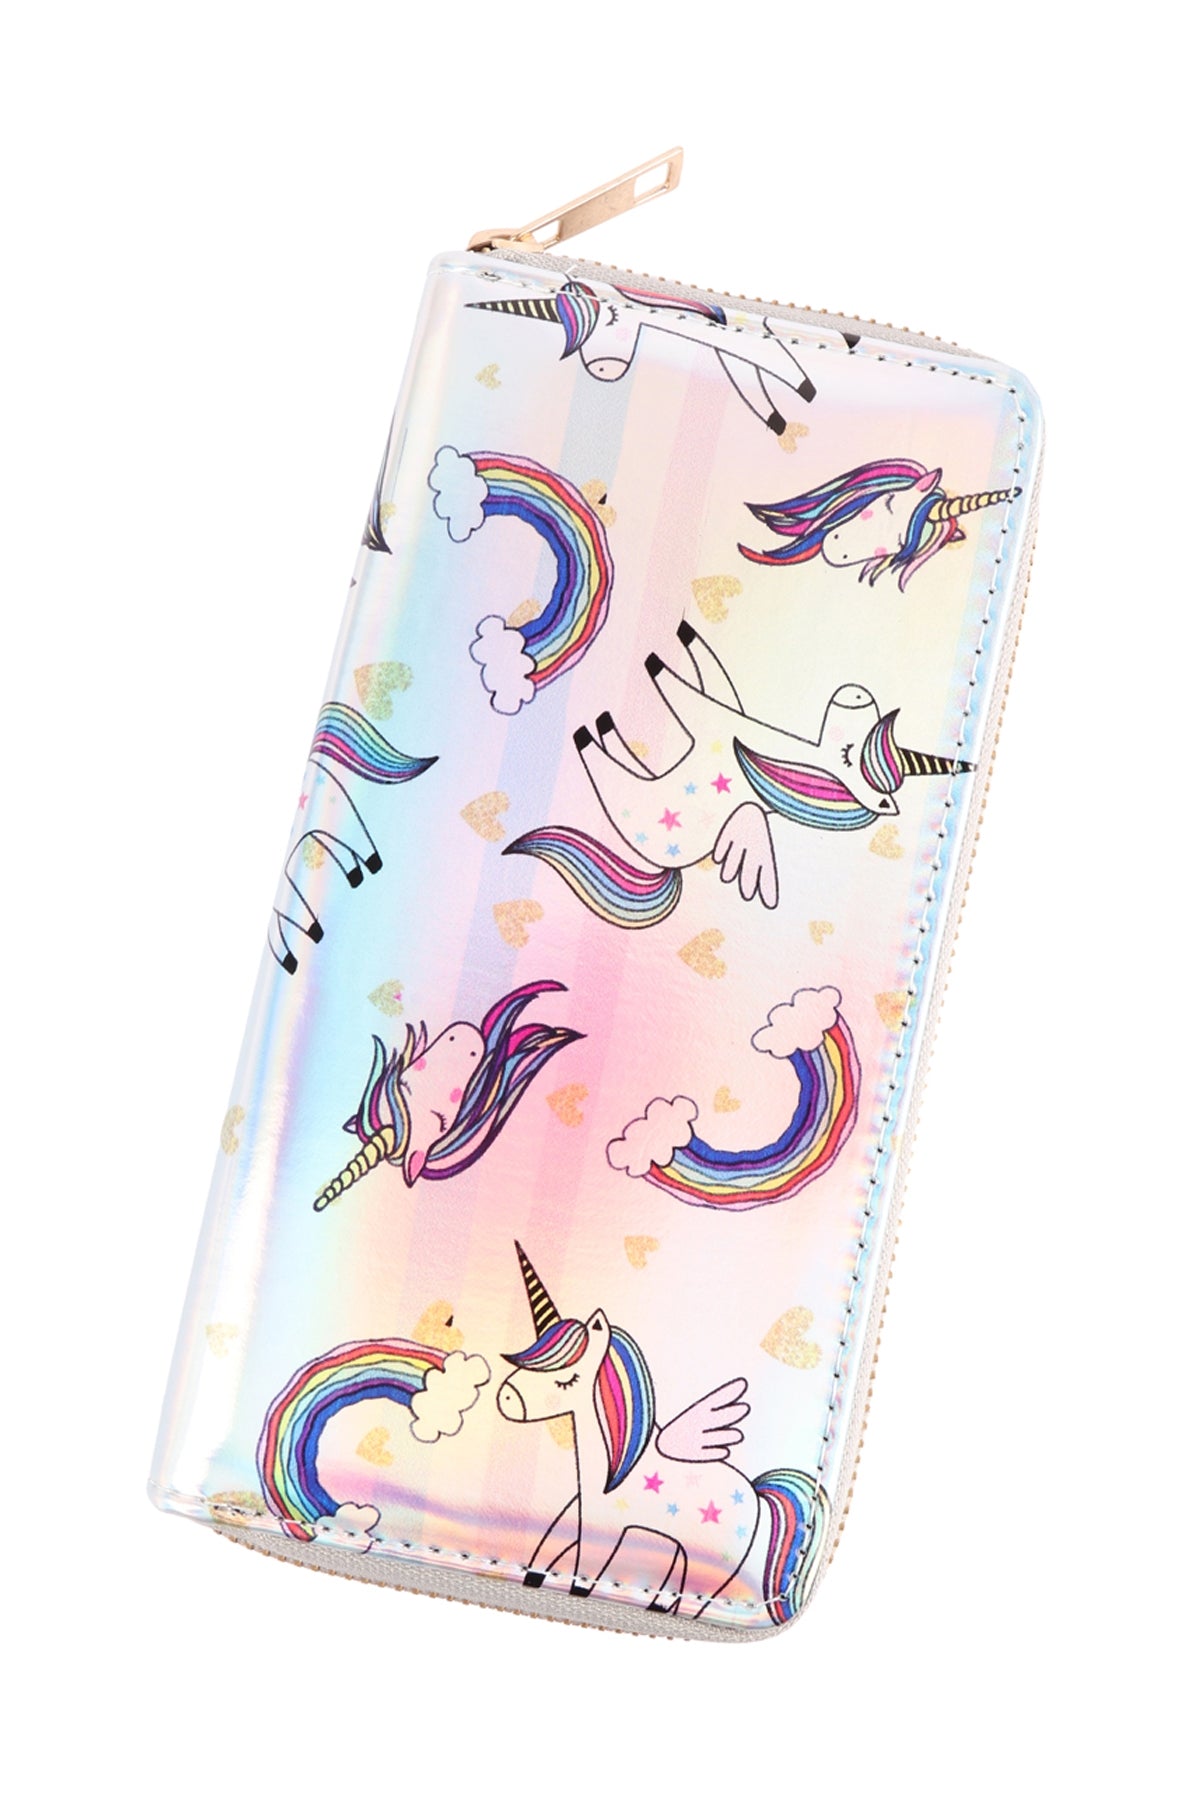 UNICORN HOLOGRAPIC SINGLE ZIPPER WALLET (NOW $2.25 ONLY!)